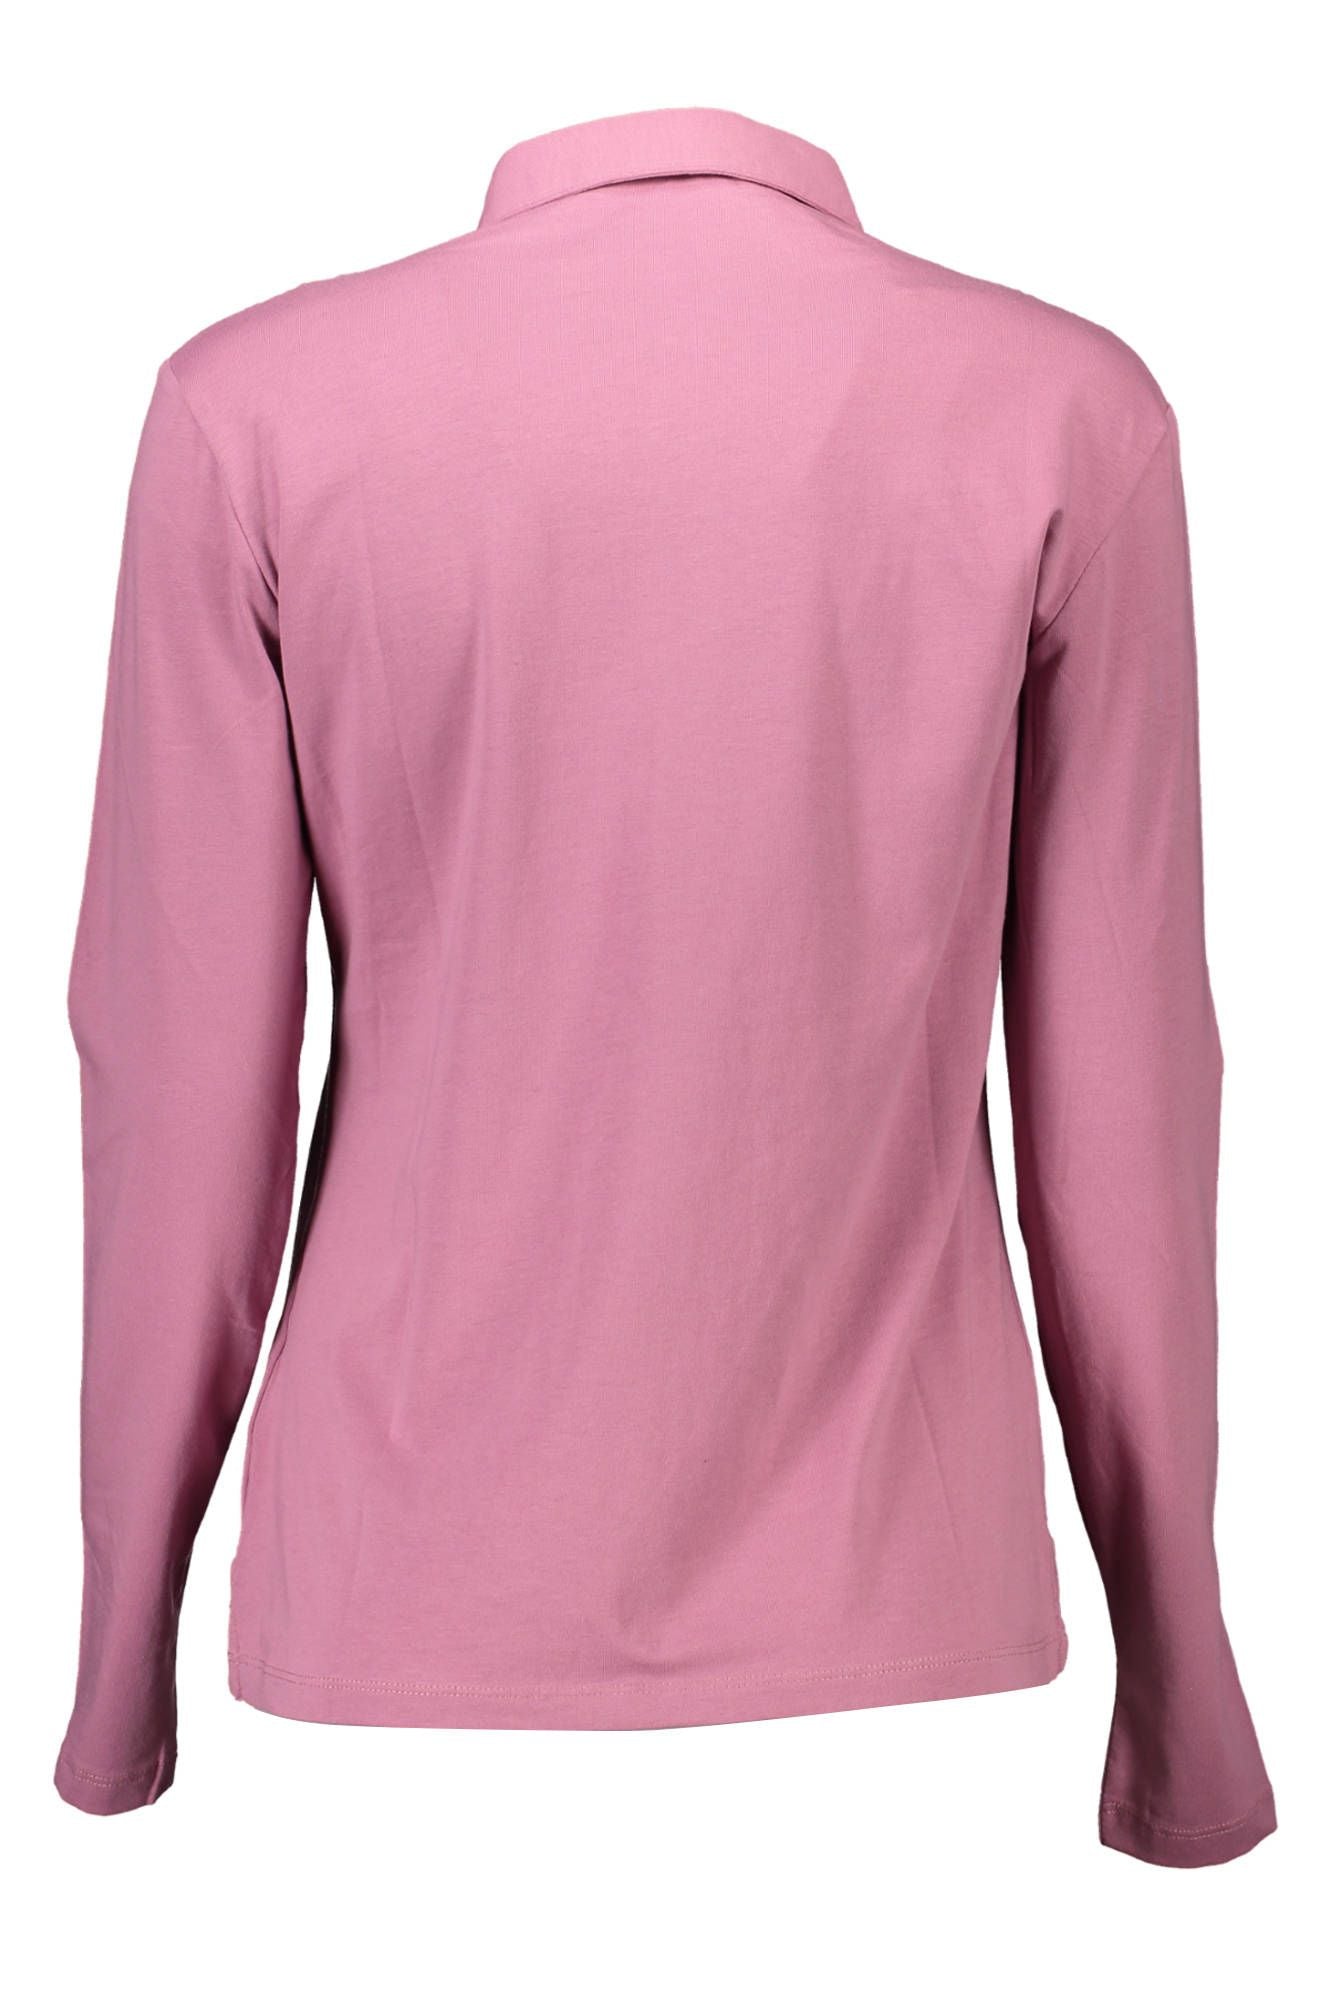 U.S. POLO ASSN. Chic Long-Sleeved Pink Polo for Women